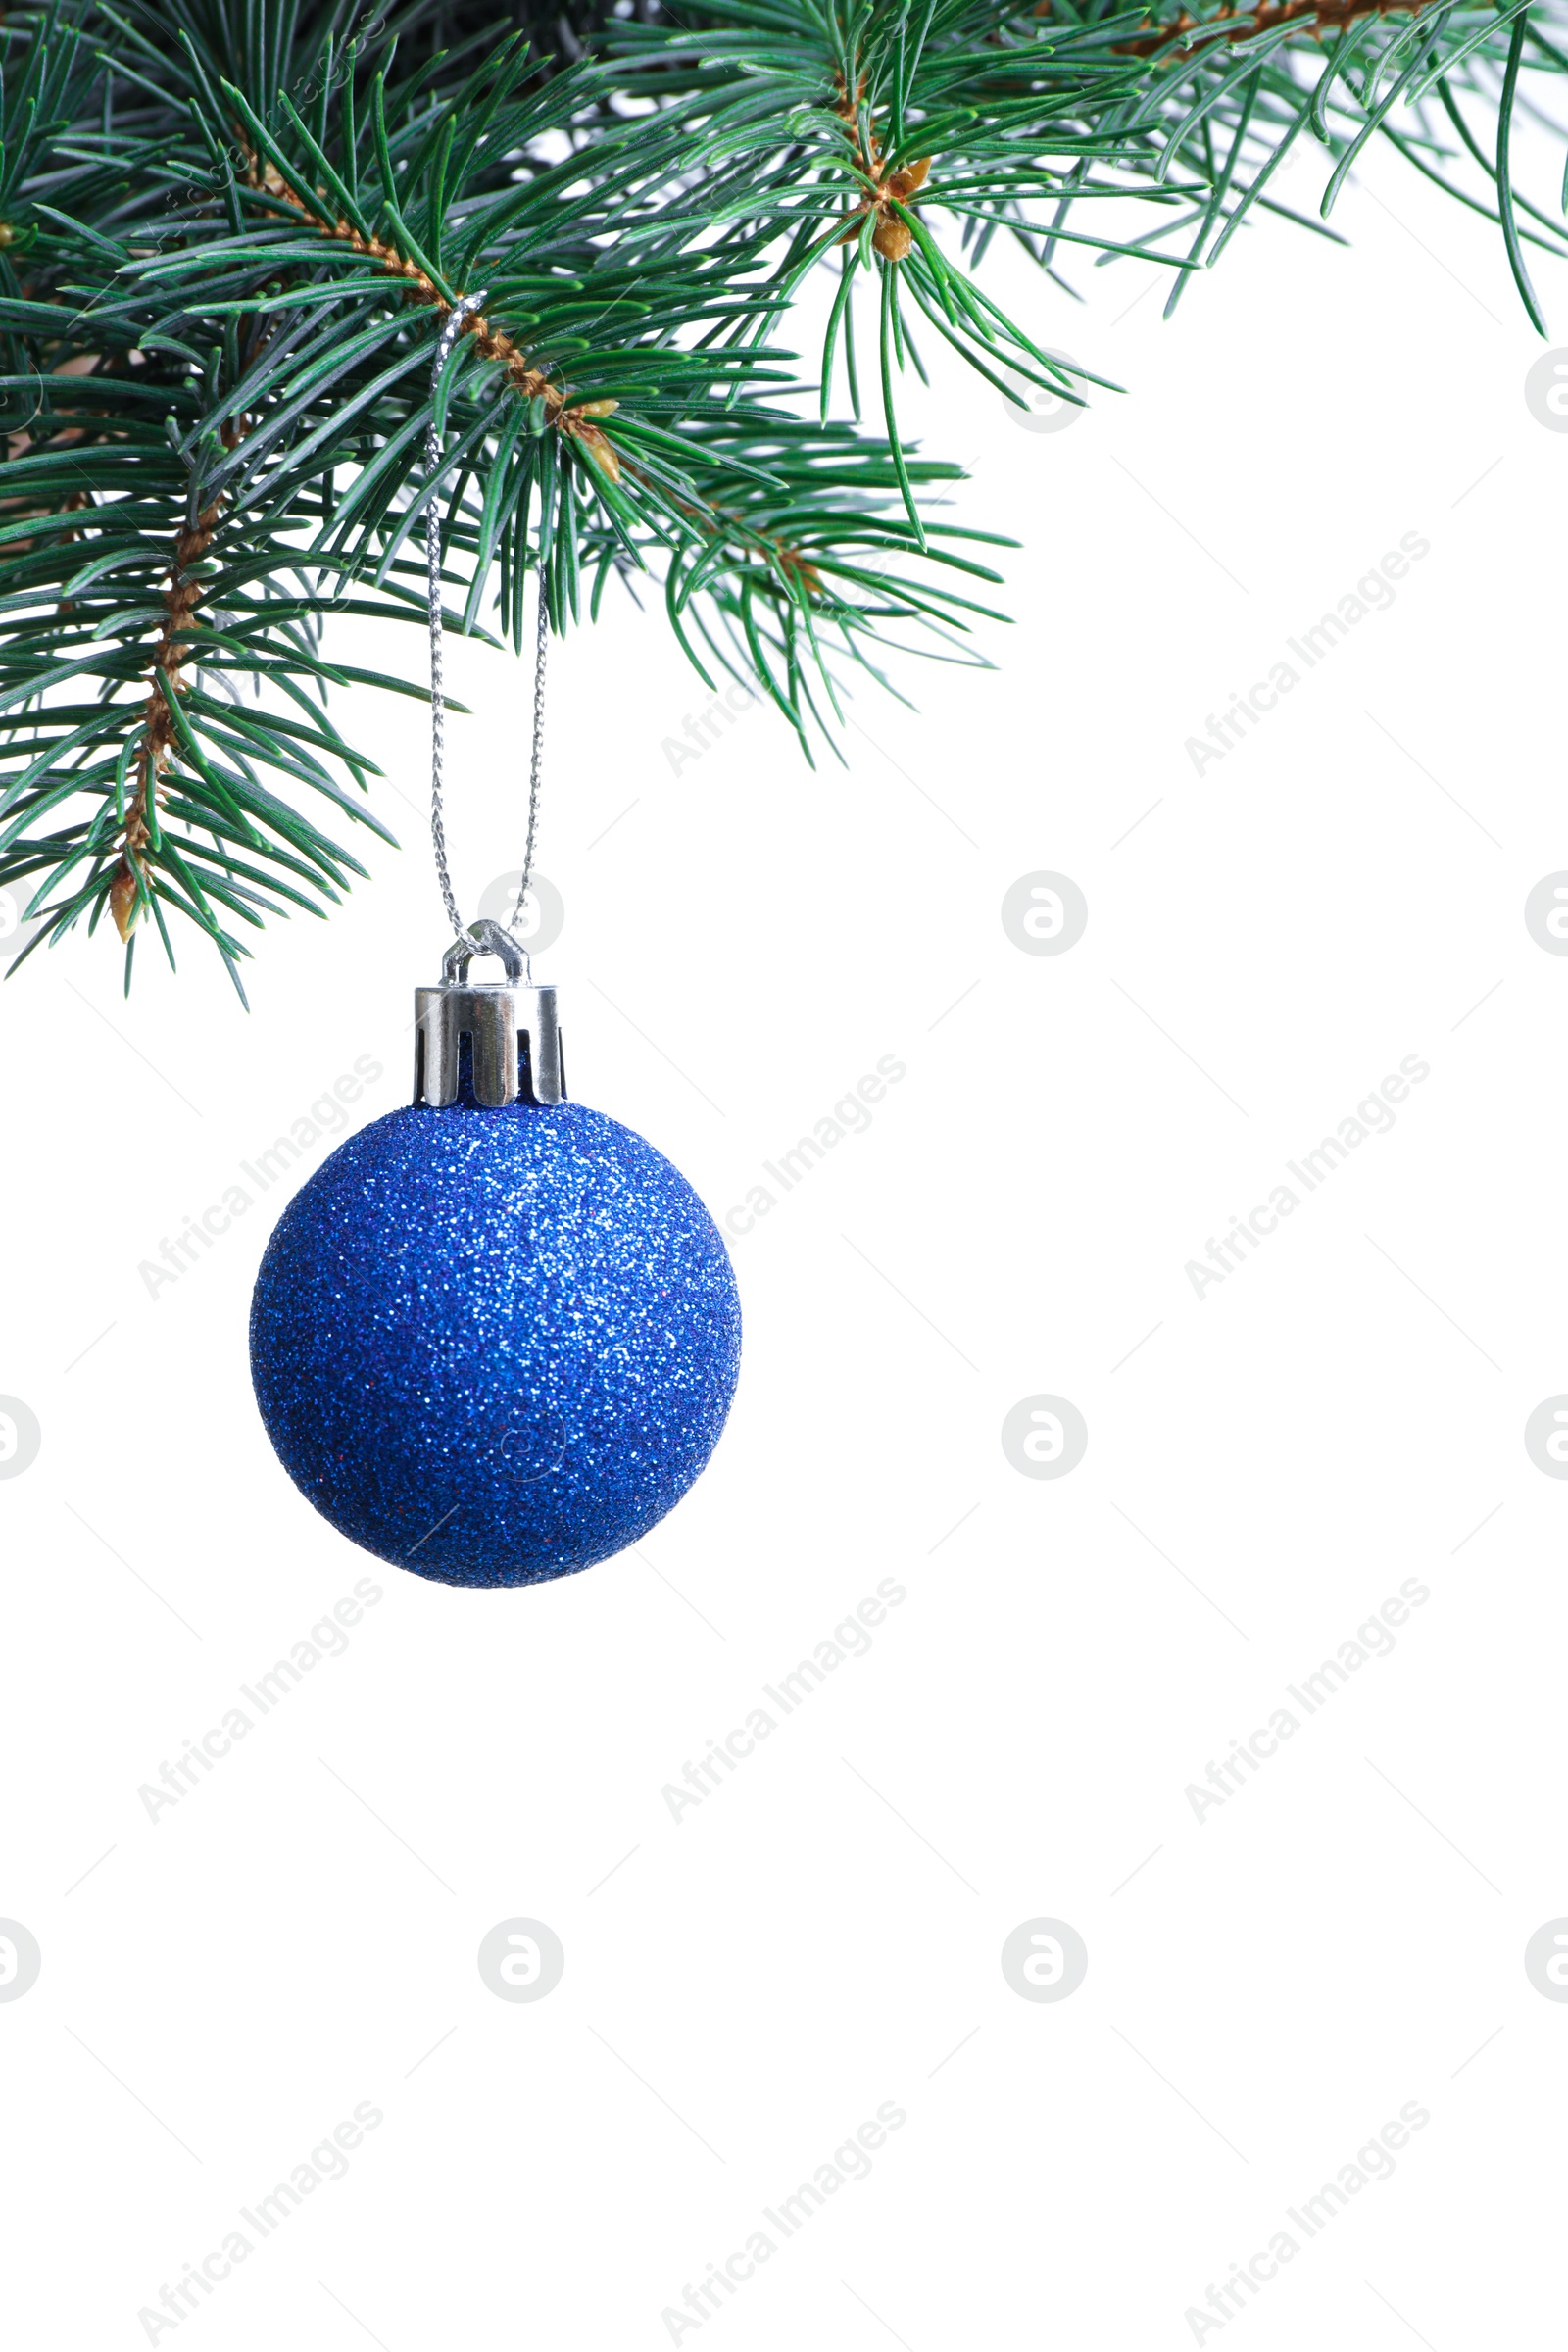 Photo of Blue Christmas ball hanging on fir tree branch against white background